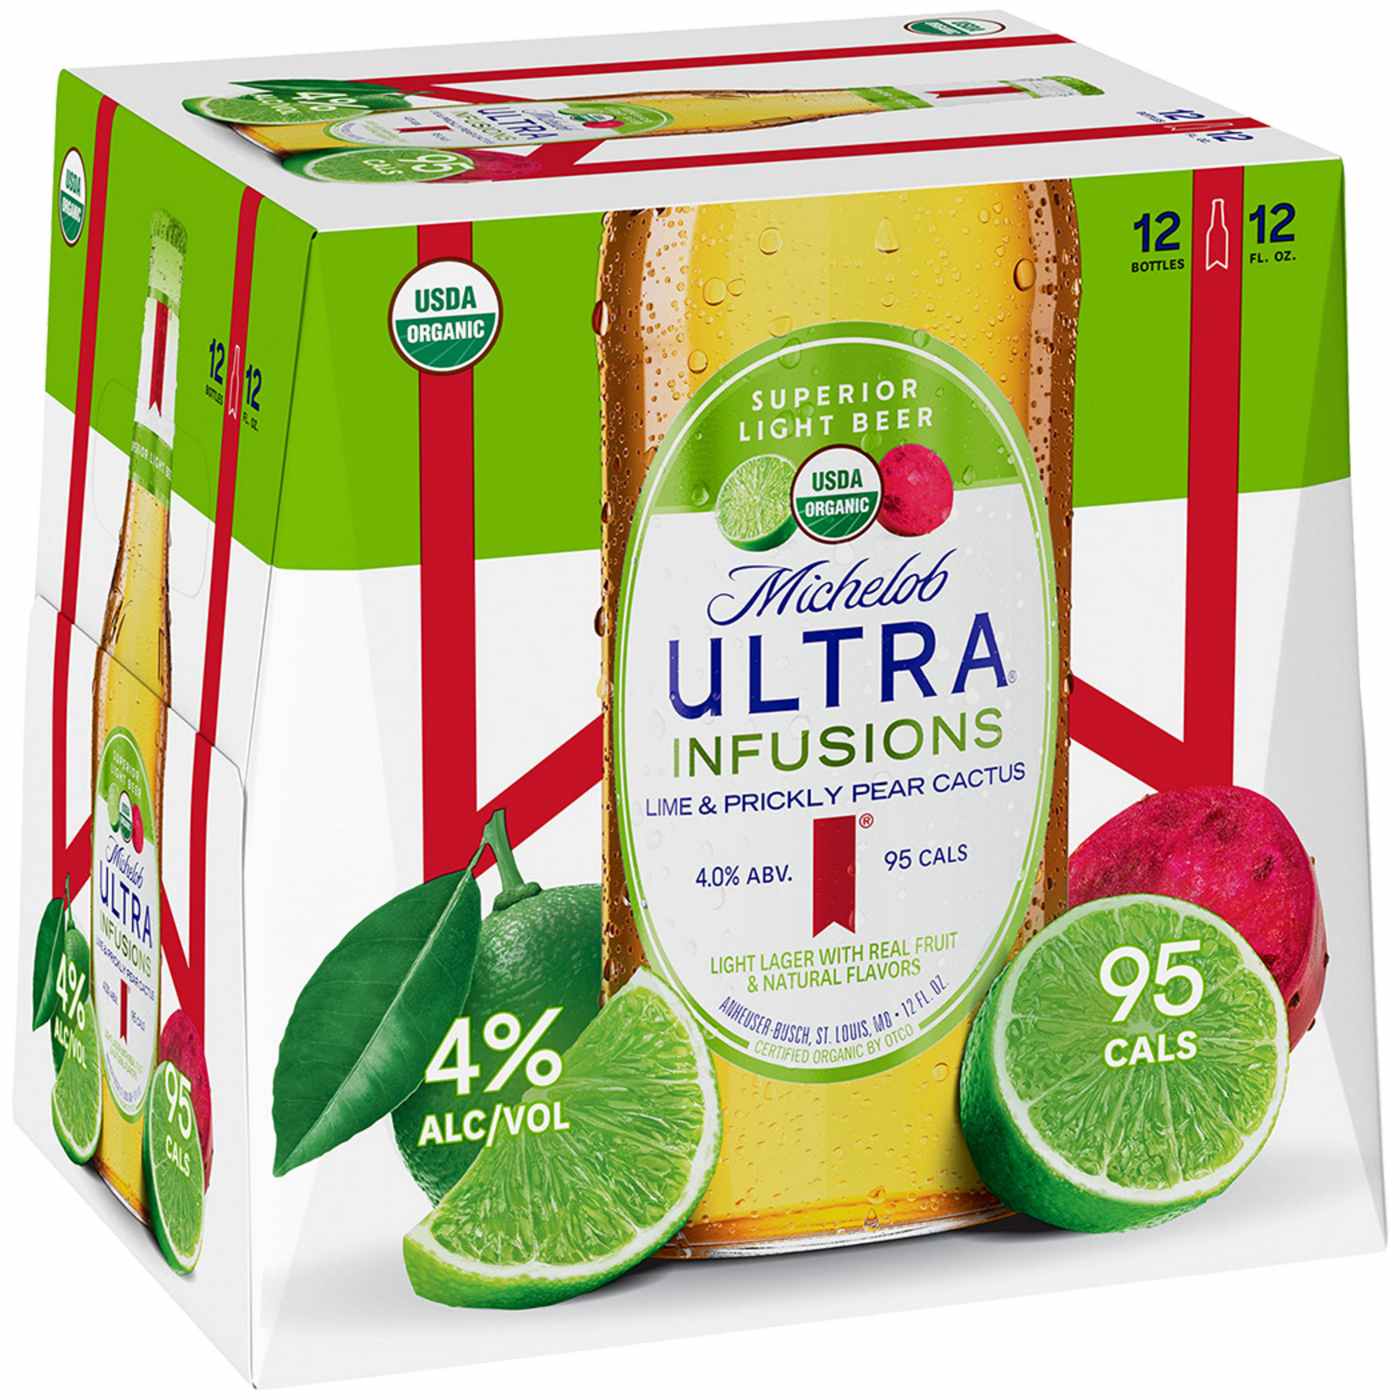 Michelob Ultra Infusions Lime & Prickly Pear Cactus Light Beer 12 pk Bottles; image 1 of 2